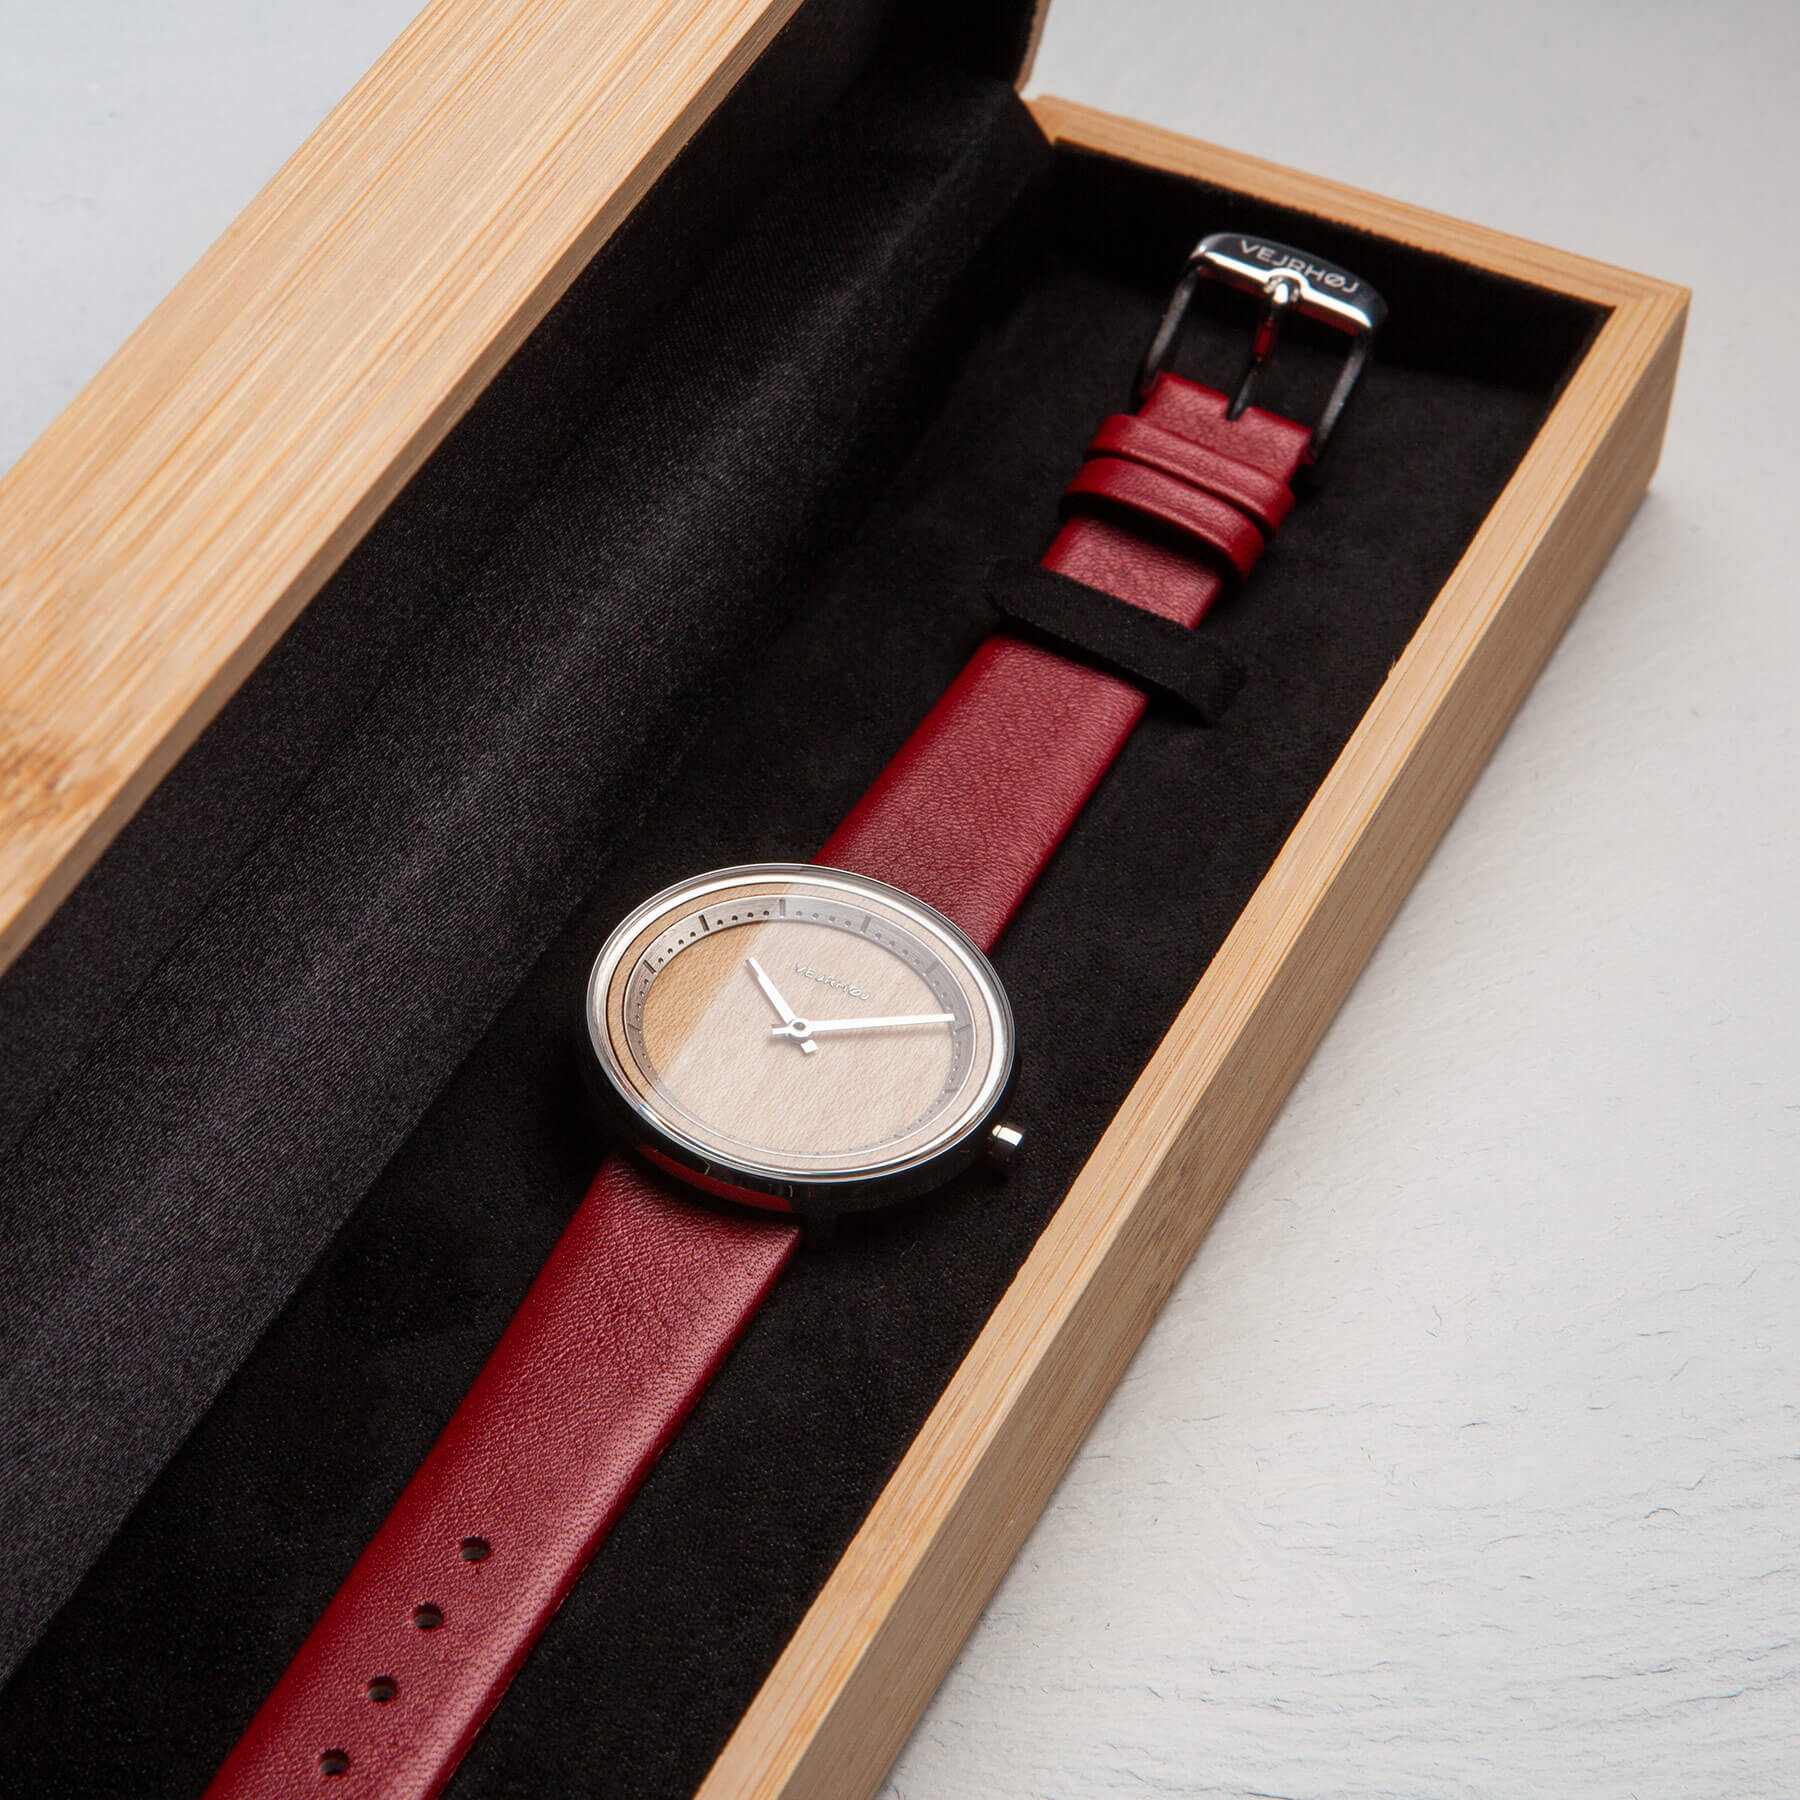 wood watch for women with red strap in box